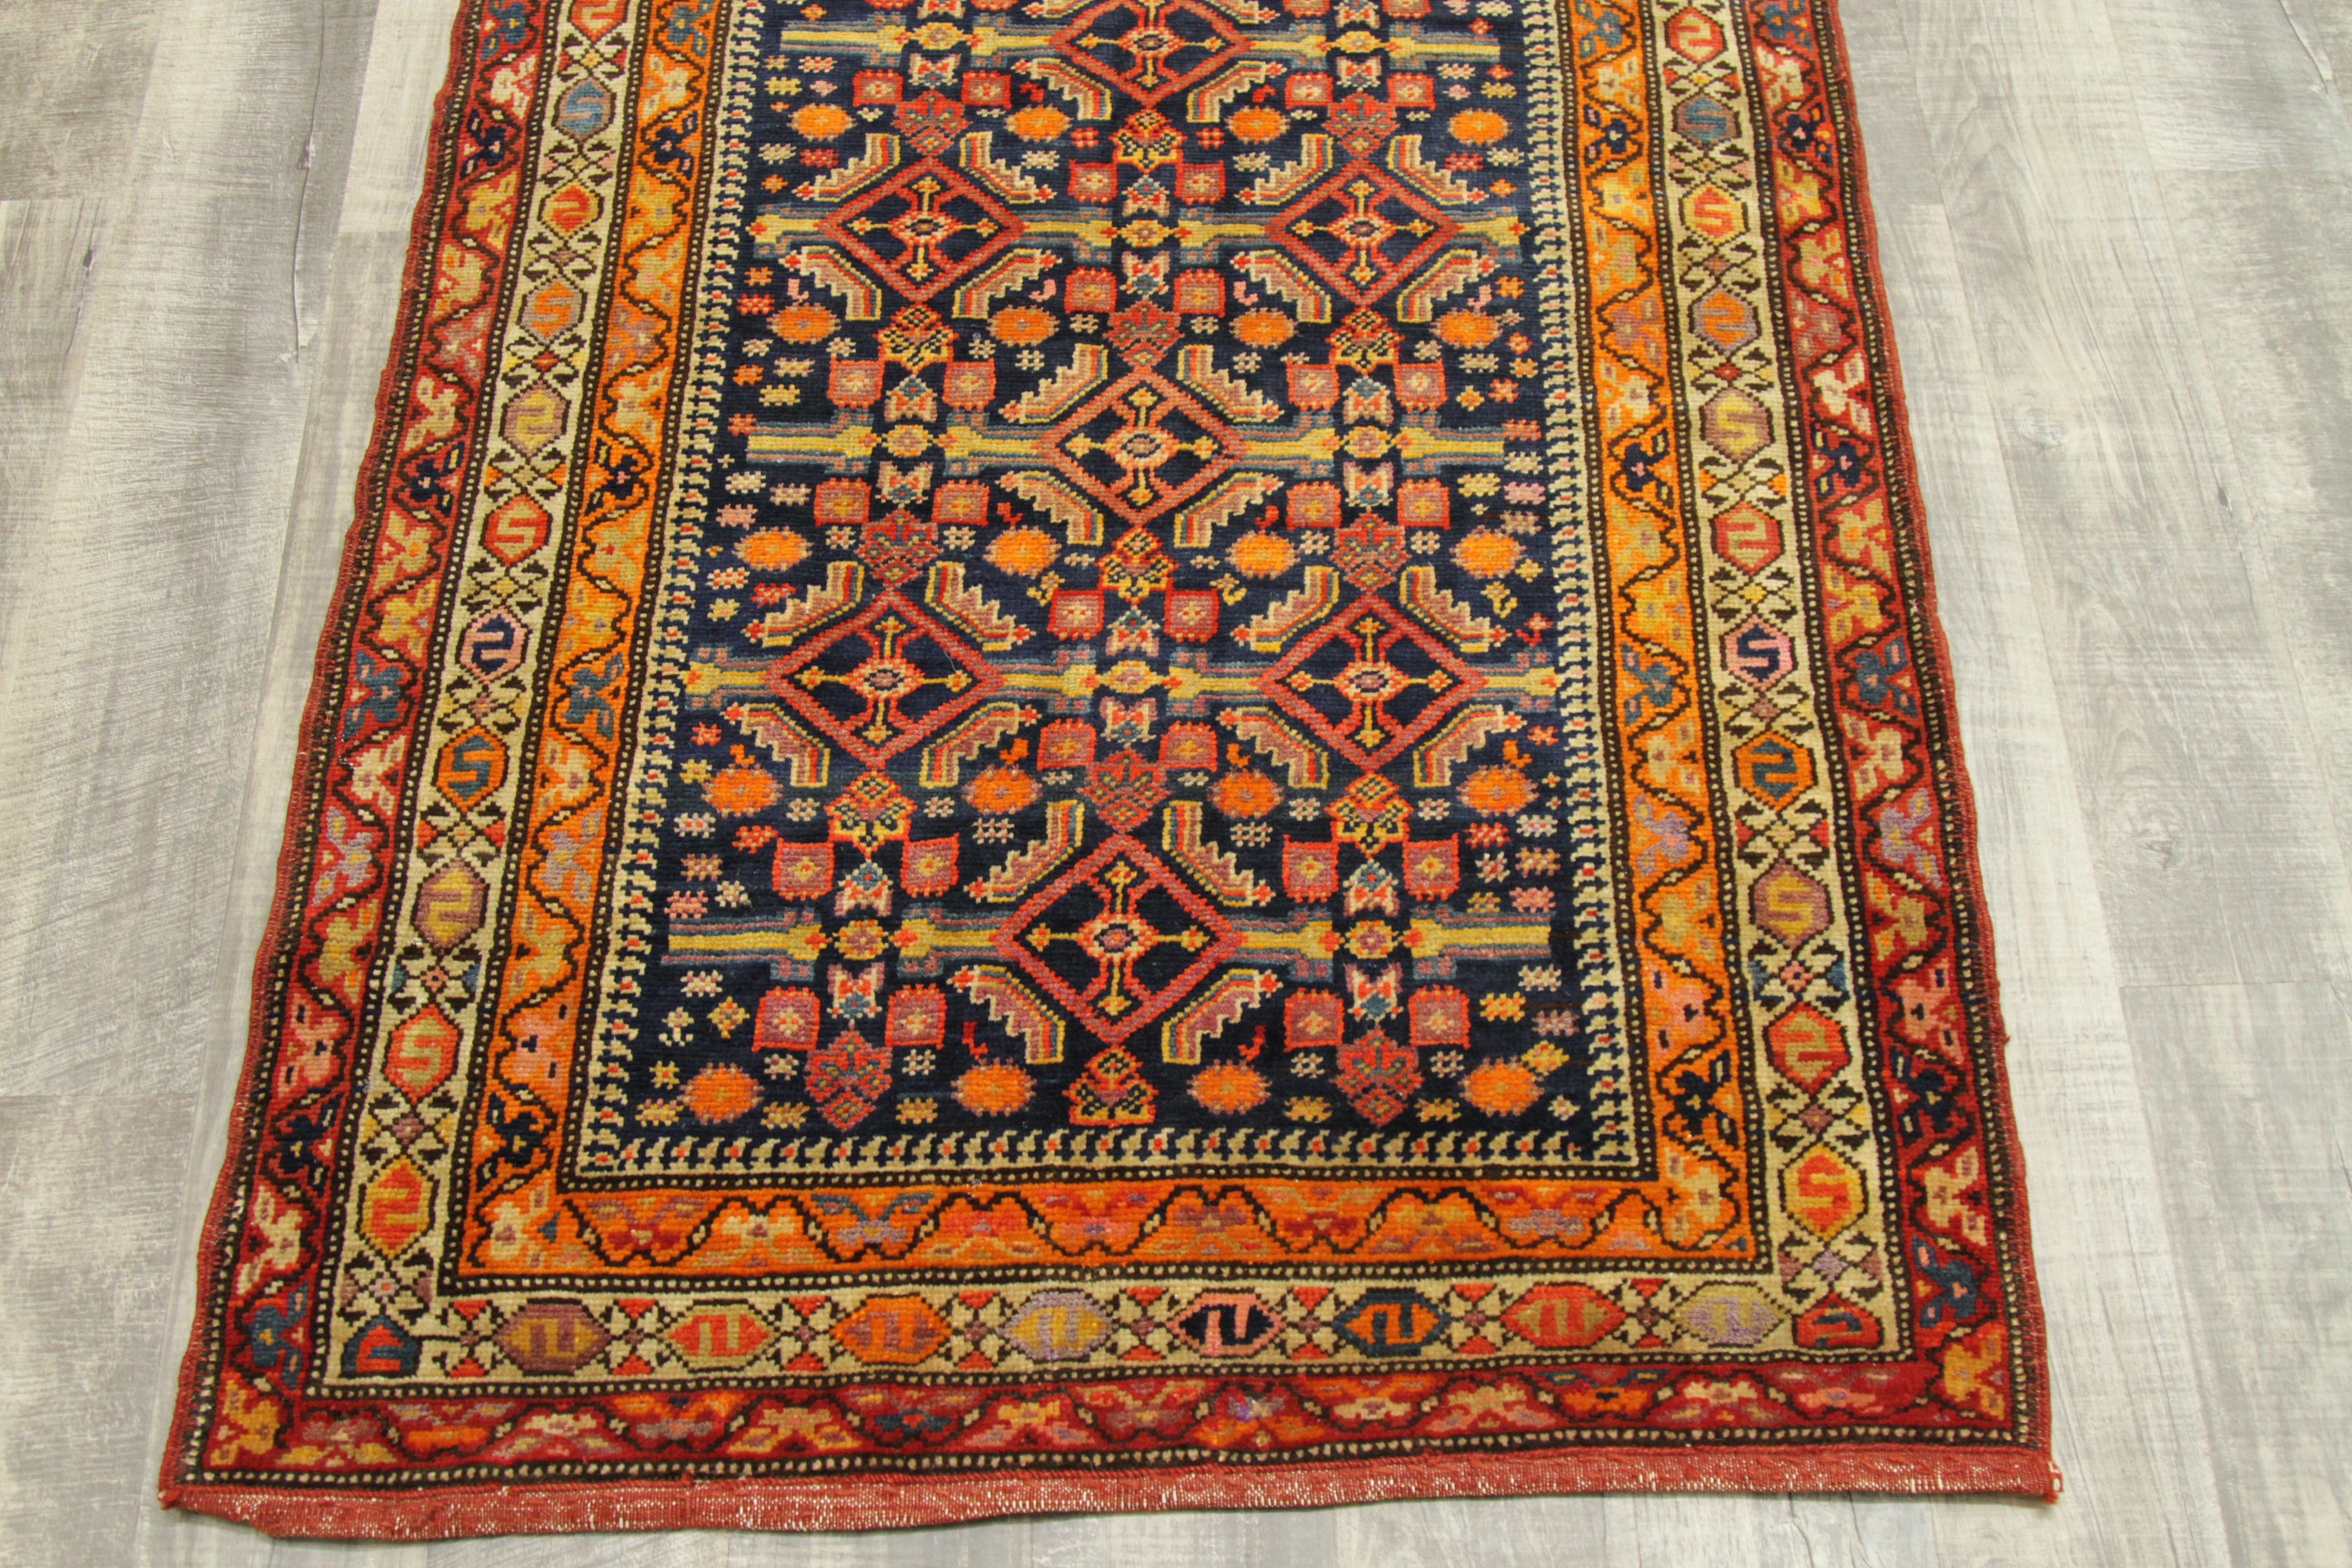 Early 20th Century 1910s Antique Persian Rug Azerbaijan Style with Fine Floral and Geometric Design For Sale